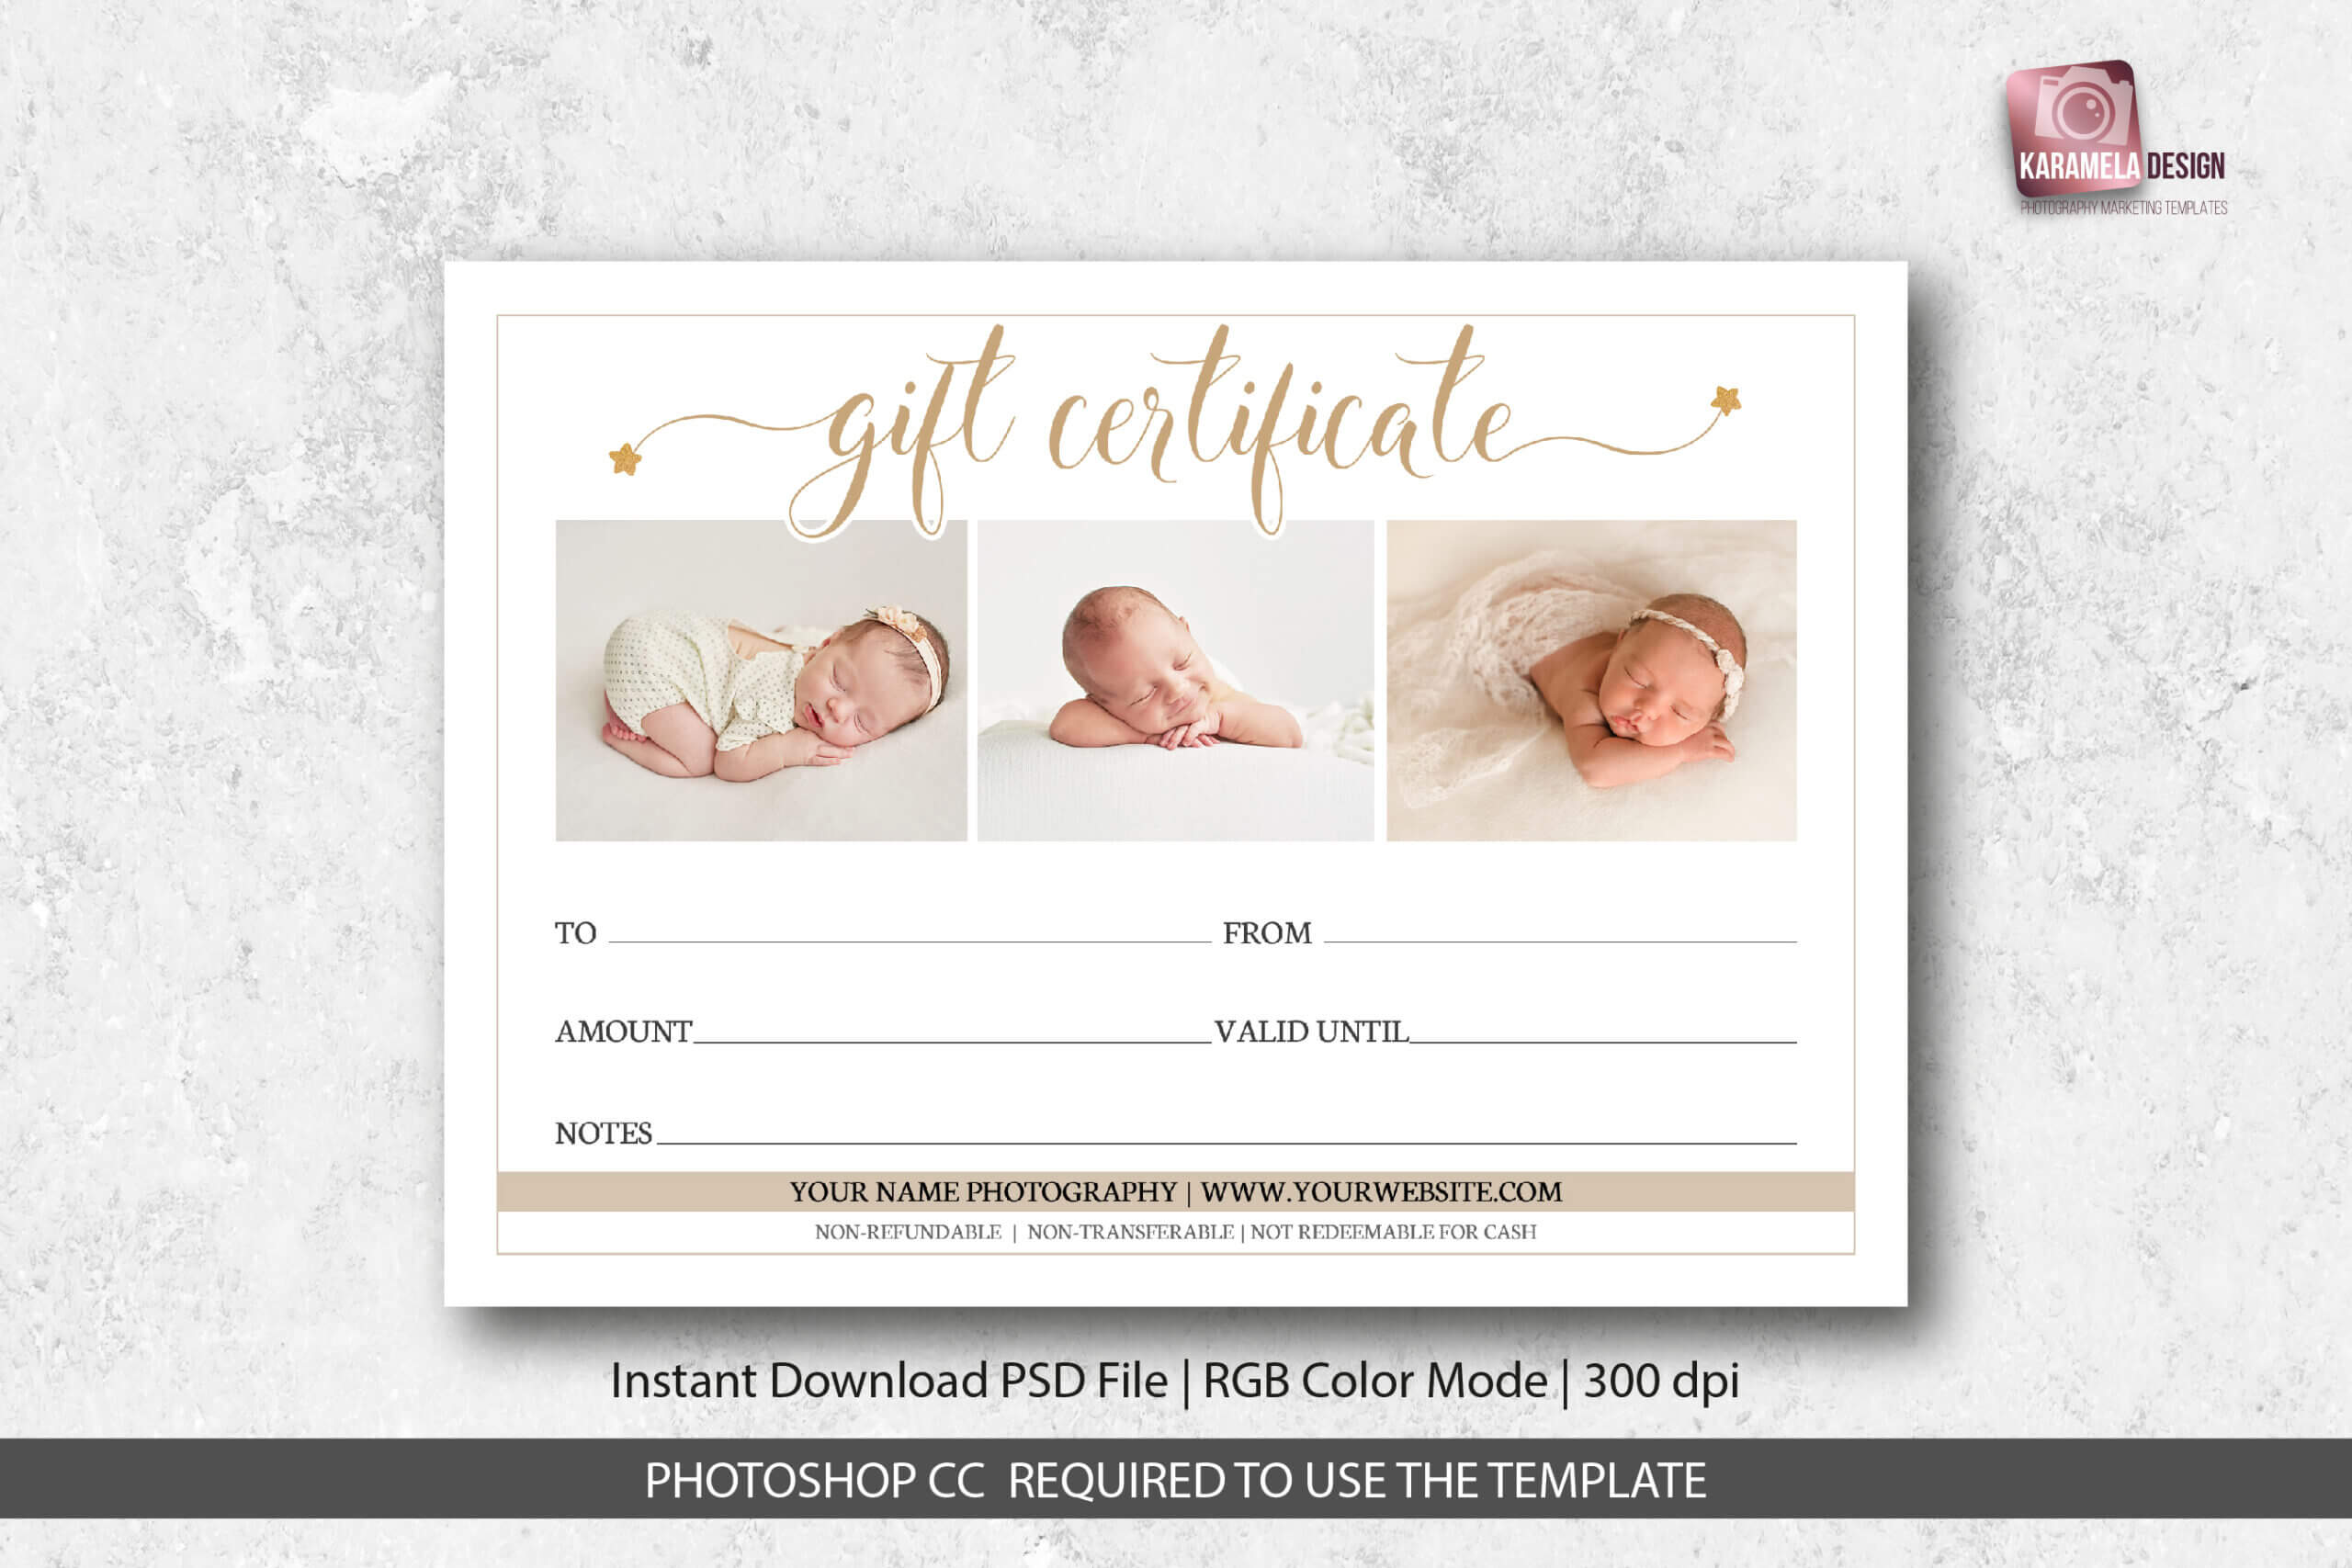 Photography Studio Gift Certificate Template In Gift Certificate Template Photoshop